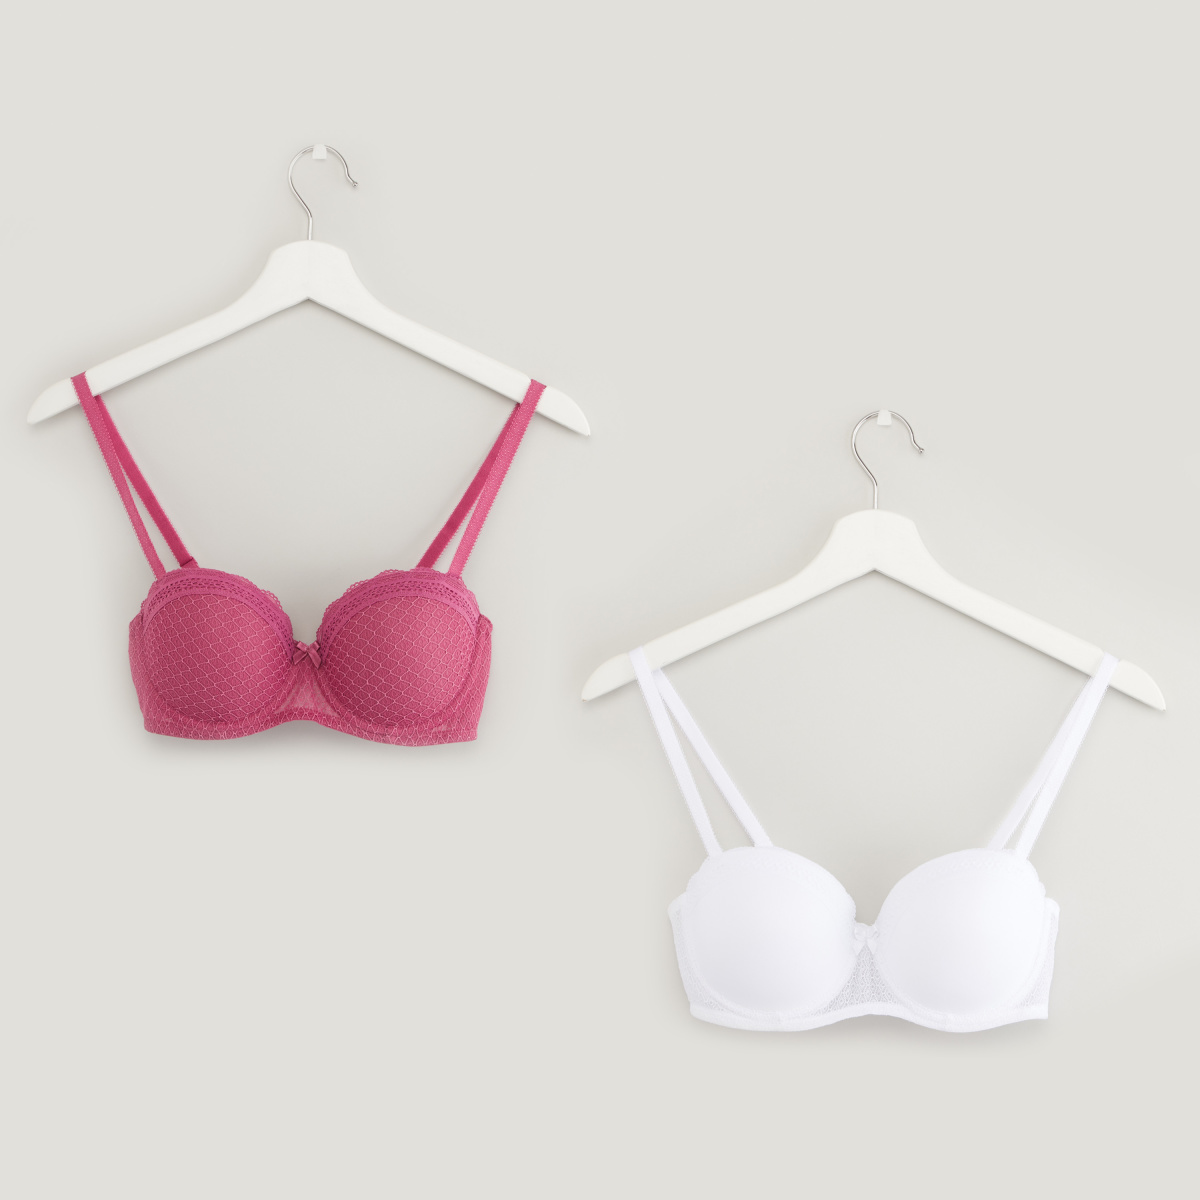 Buy Set of 2 - Textured Balconette Bra with Hook and Eye Closure